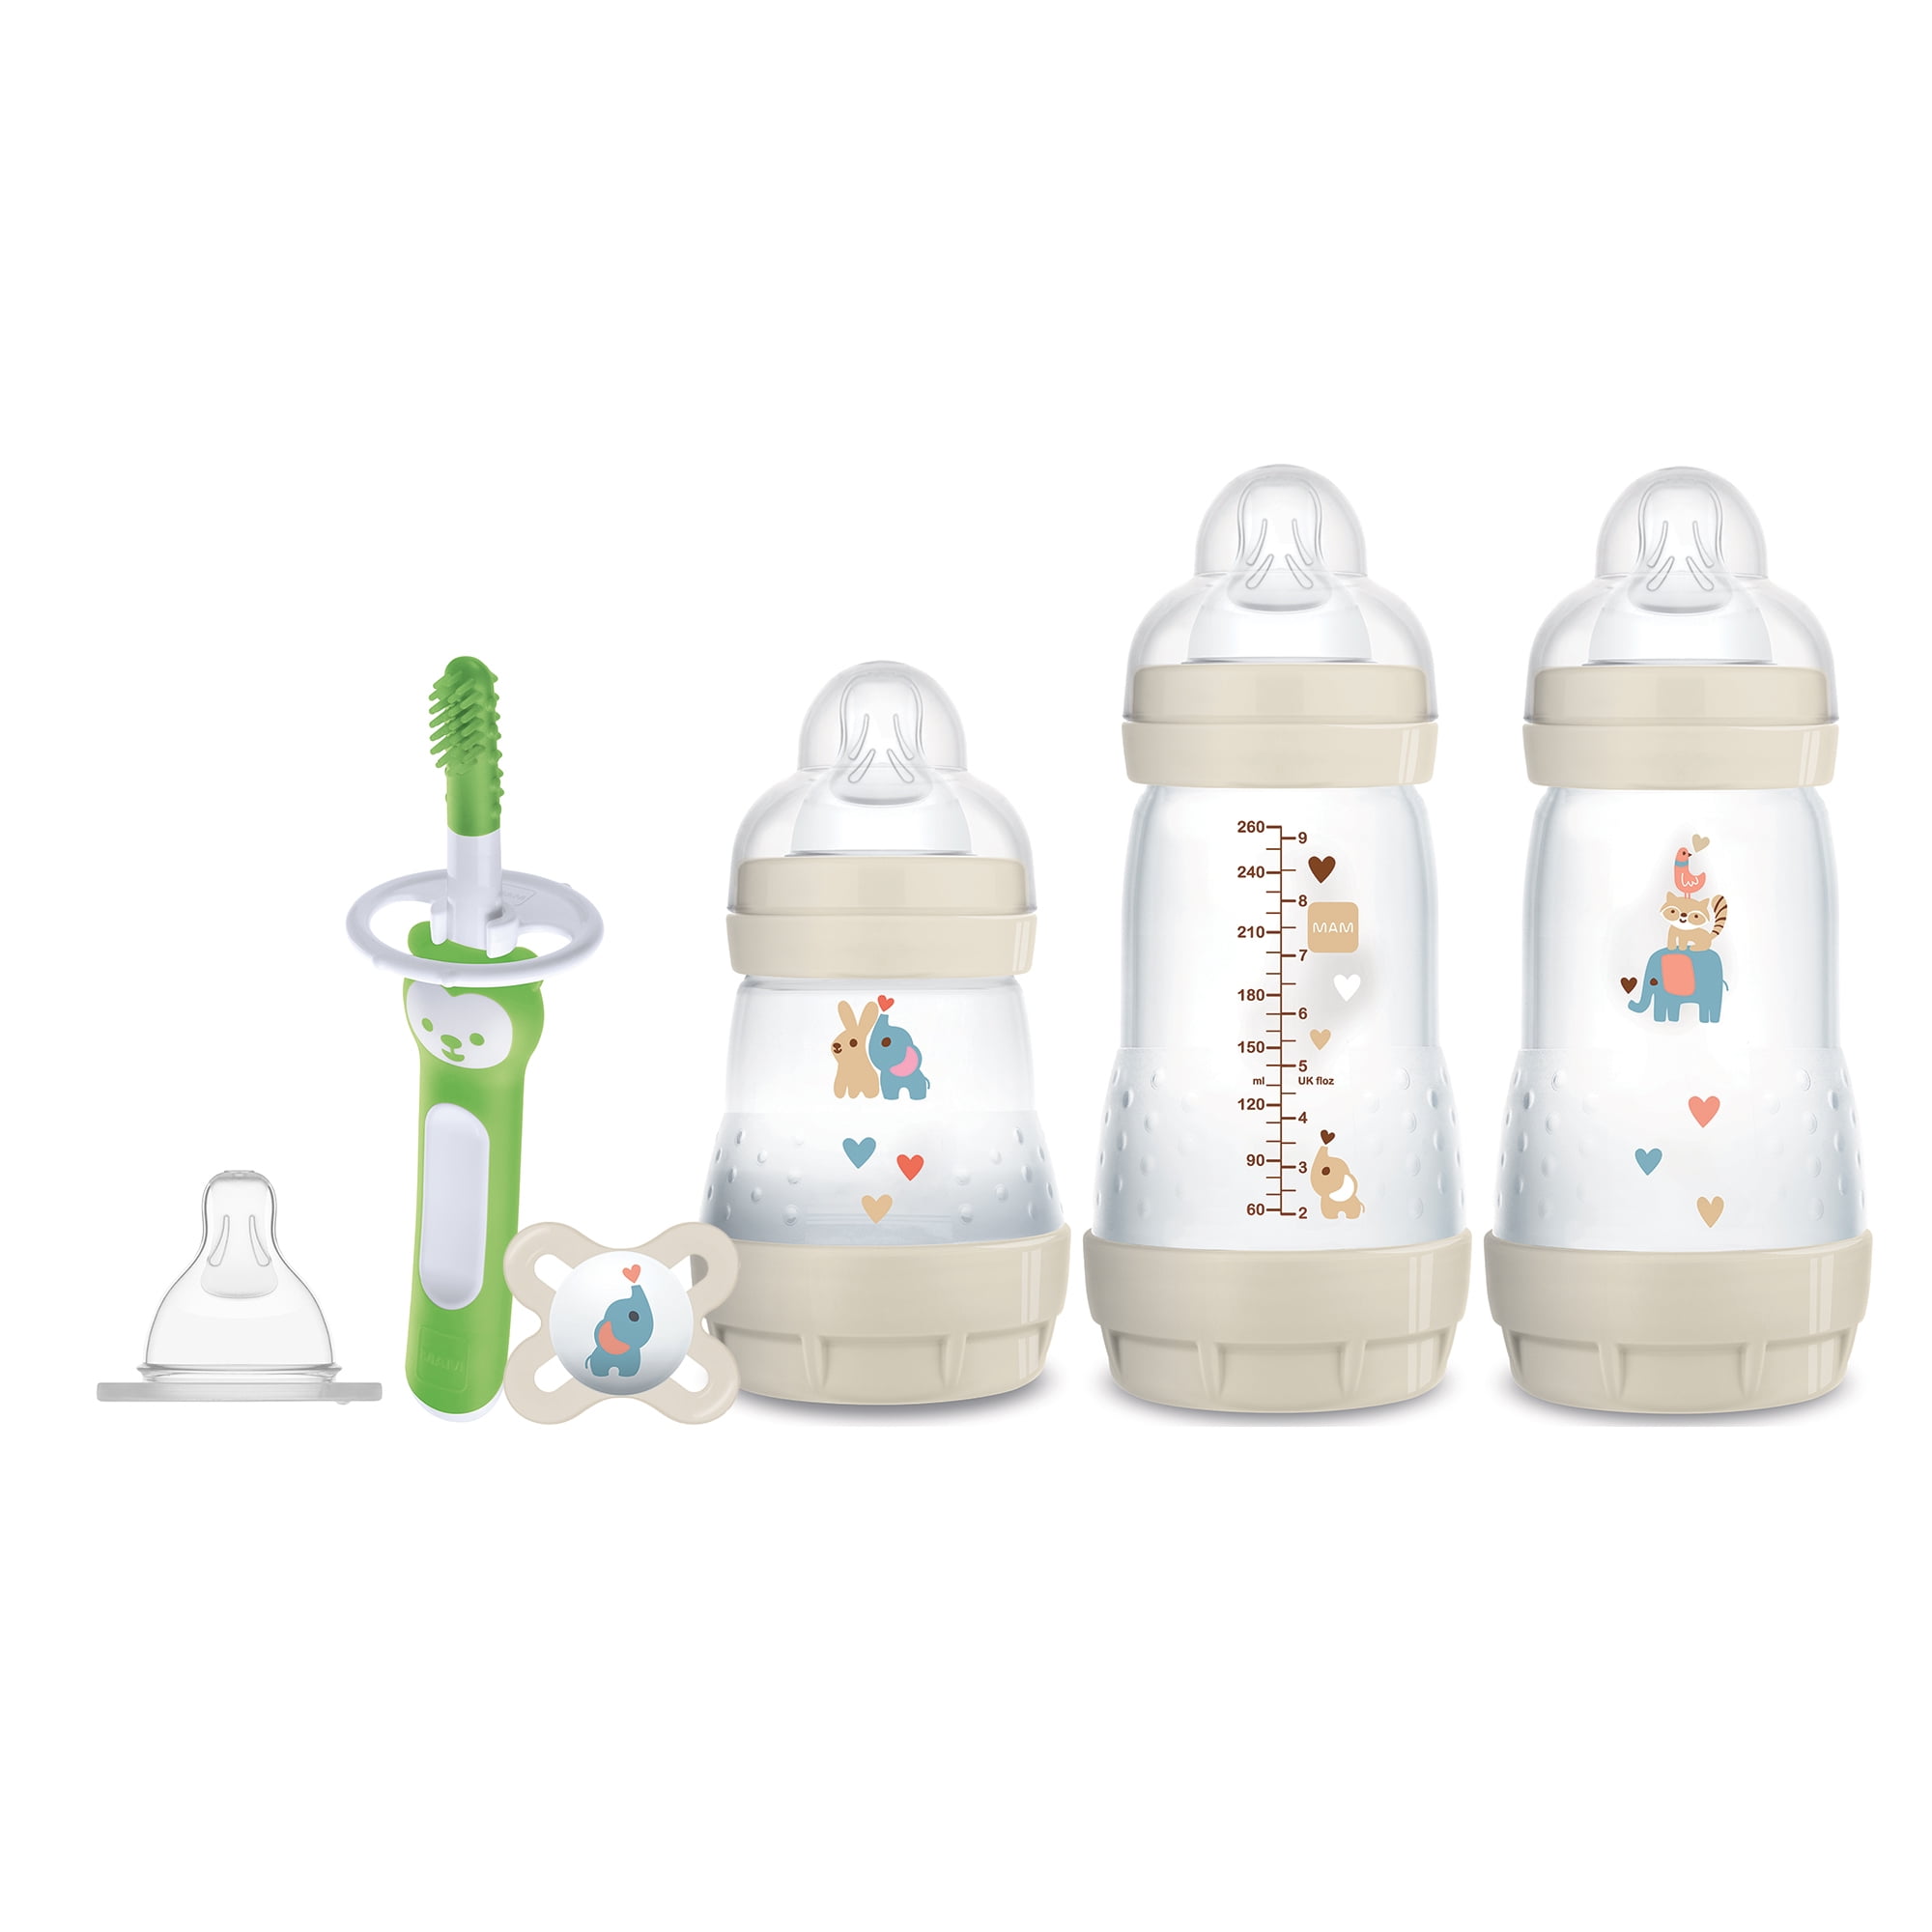 MAM Newborn Essentials Gift Set, Easy Start Anti-Colic Bottle, SkinSoft Silicone Nipple and Pacifier, Sterilizer Case, Massaging Baby Toothbrush and Gum Cleaner, Unisex, 0-3 Months (6-Count)